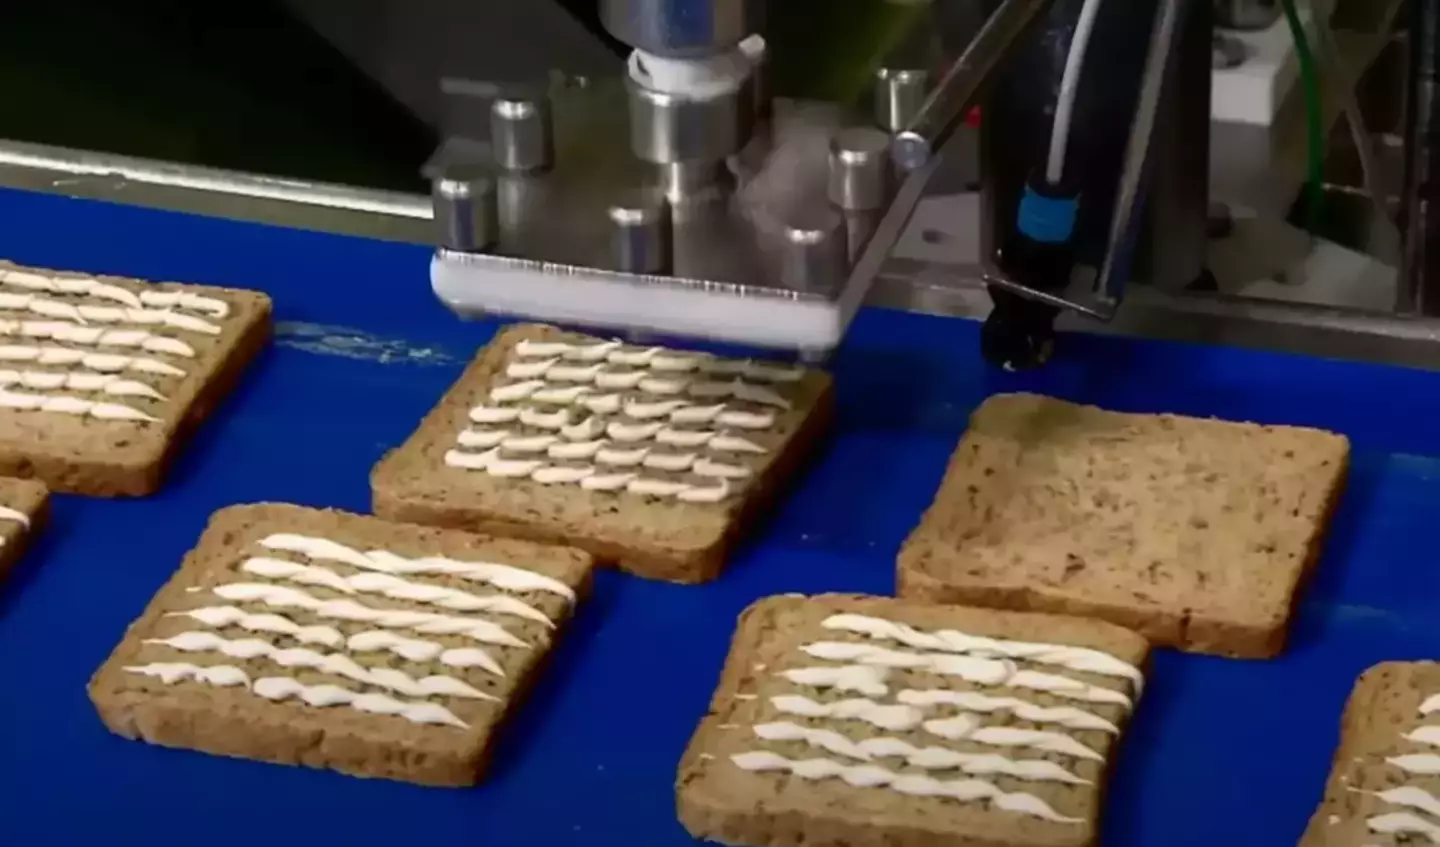 Machines are used to put butter on the bread.